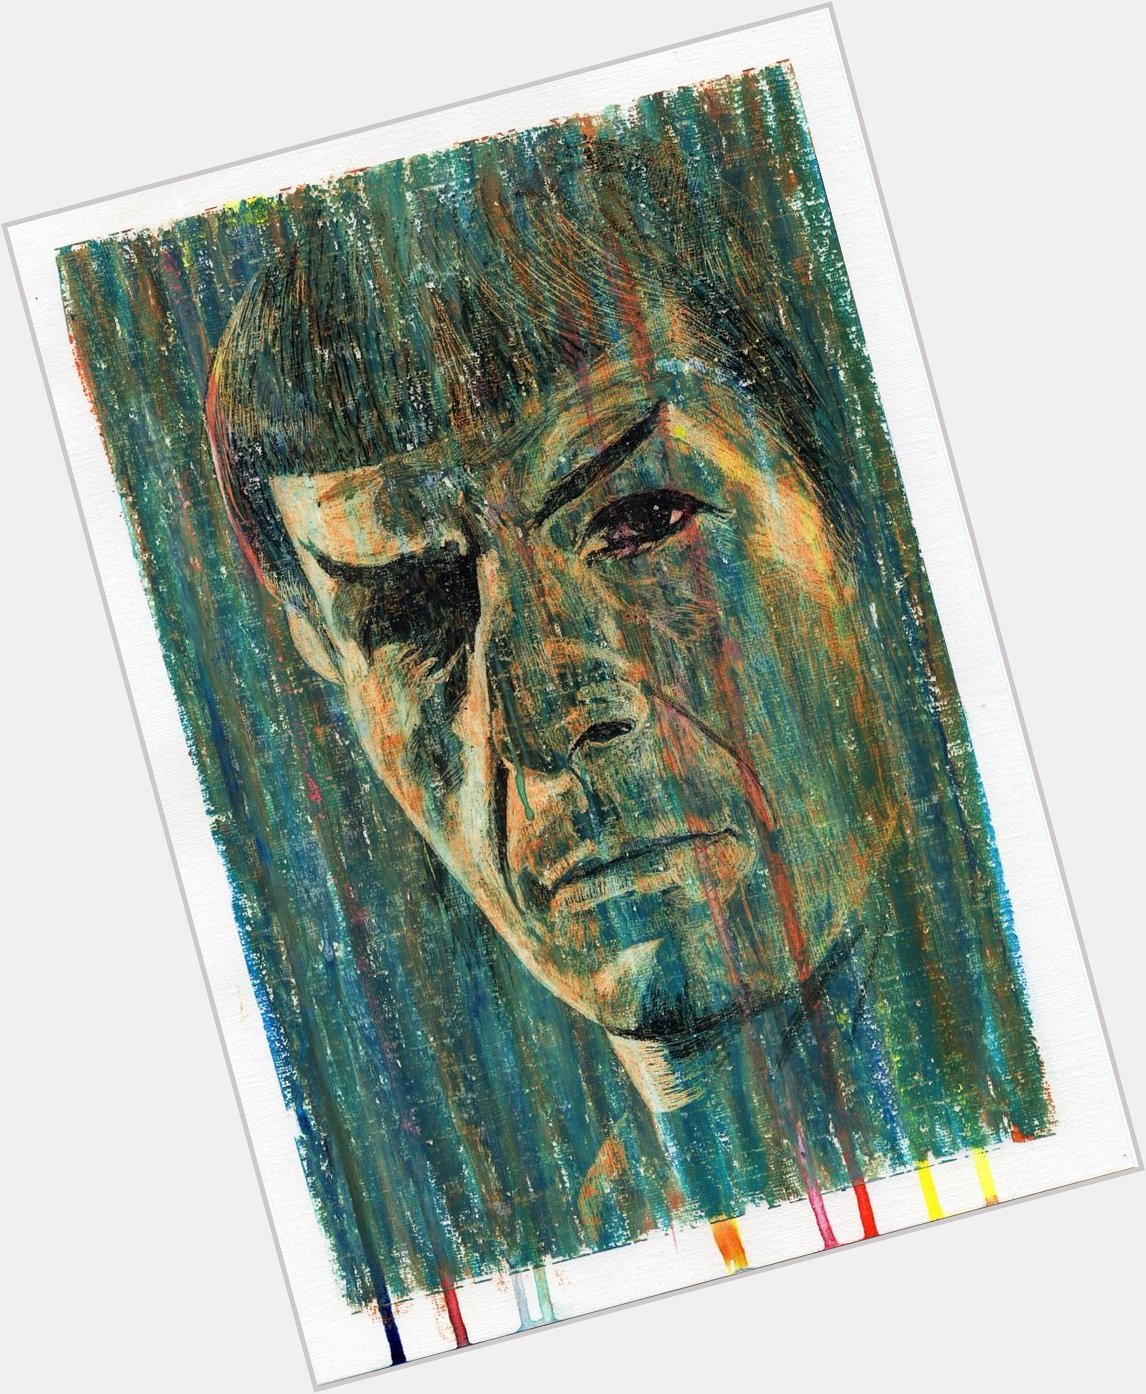 Happy birthday Leonard Nimoy, born on this day in 1931. This picture: oil and ink on acrylic paper, 21cm x 30cm. 